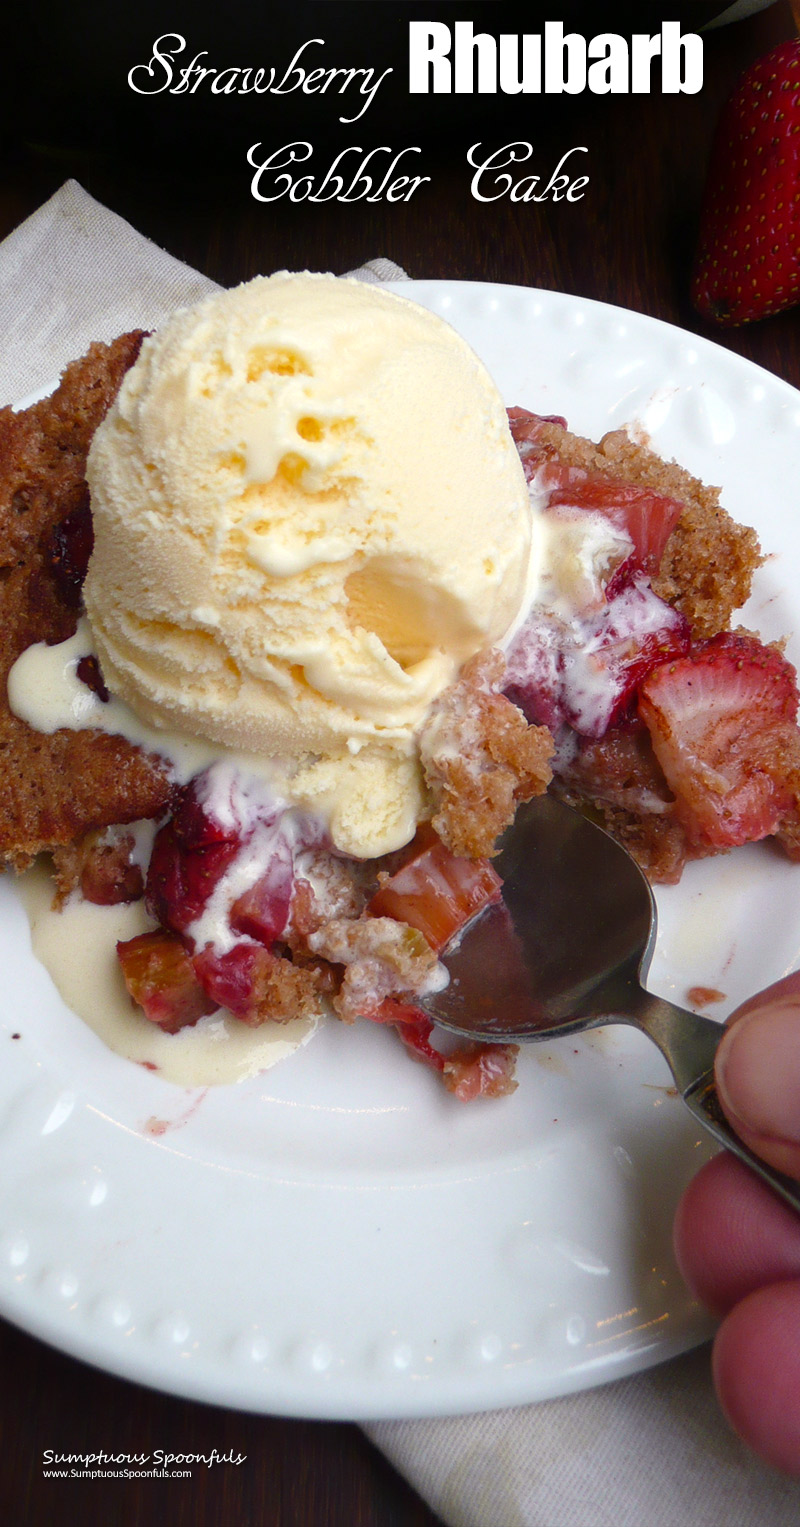 Pin this Strawberry Rhubarb Cobbler Cake recipe for later.